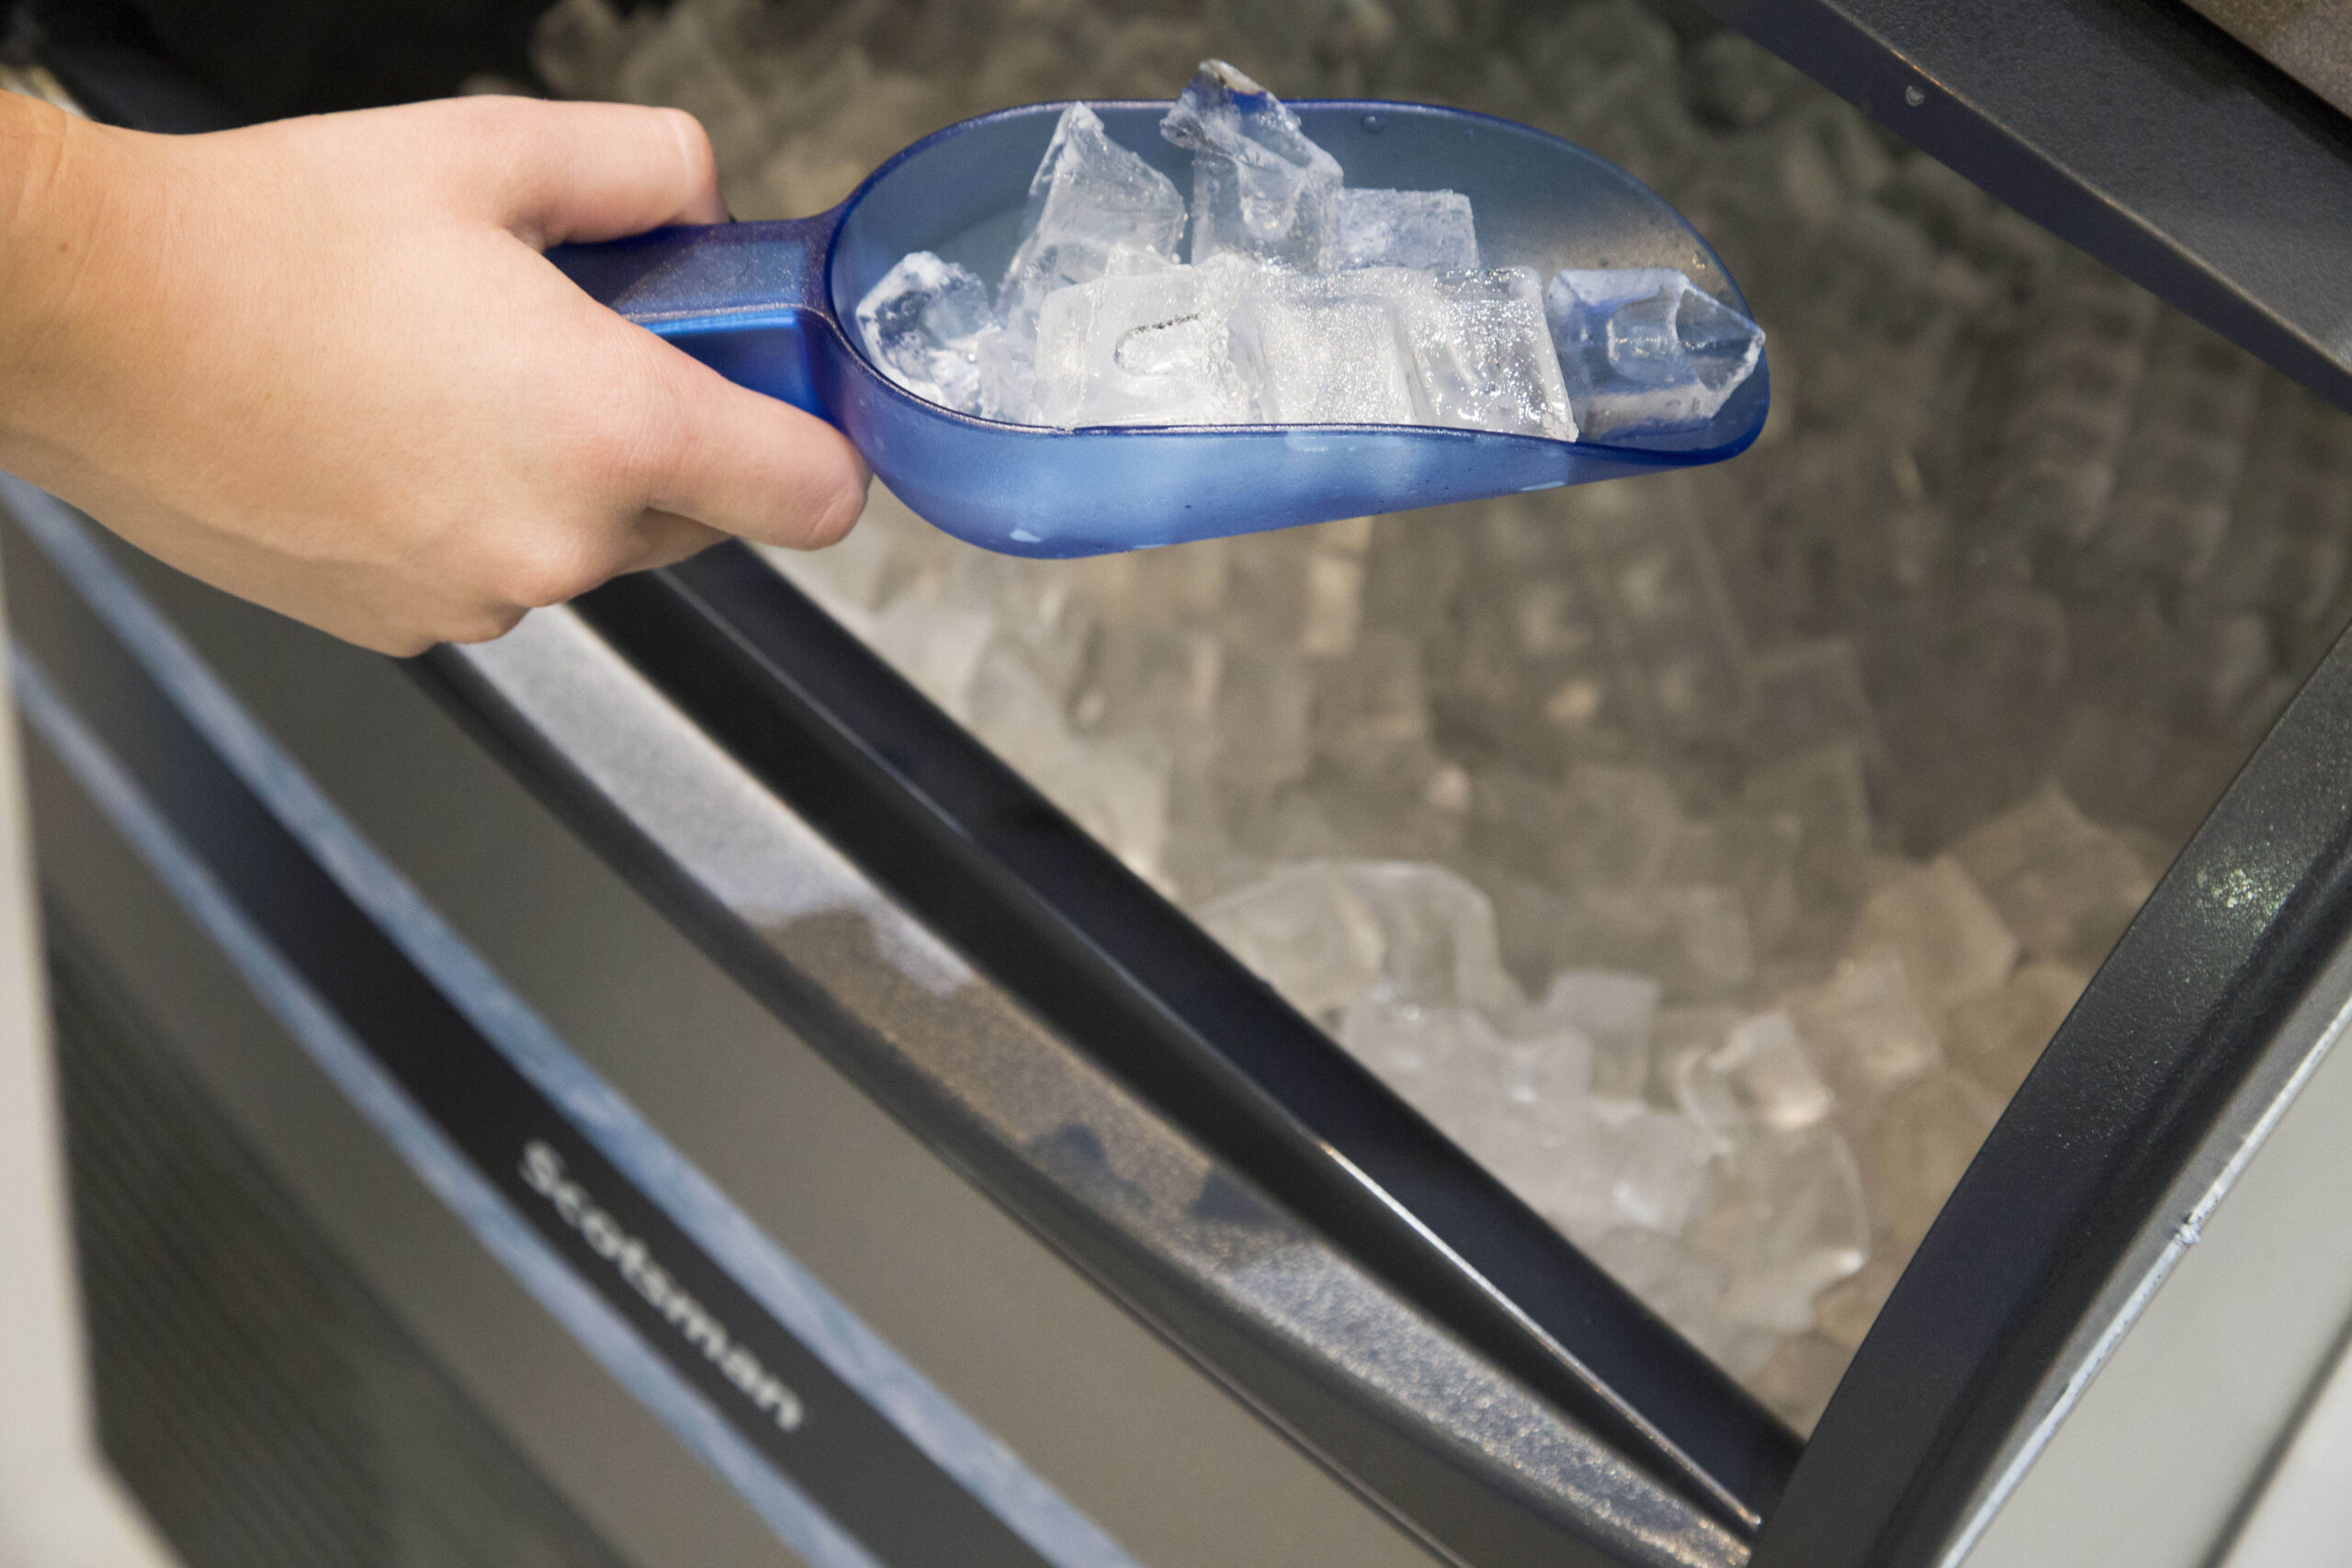 Scotsman is set to unveil 'a host' of new icemakers at Host Milan 2015